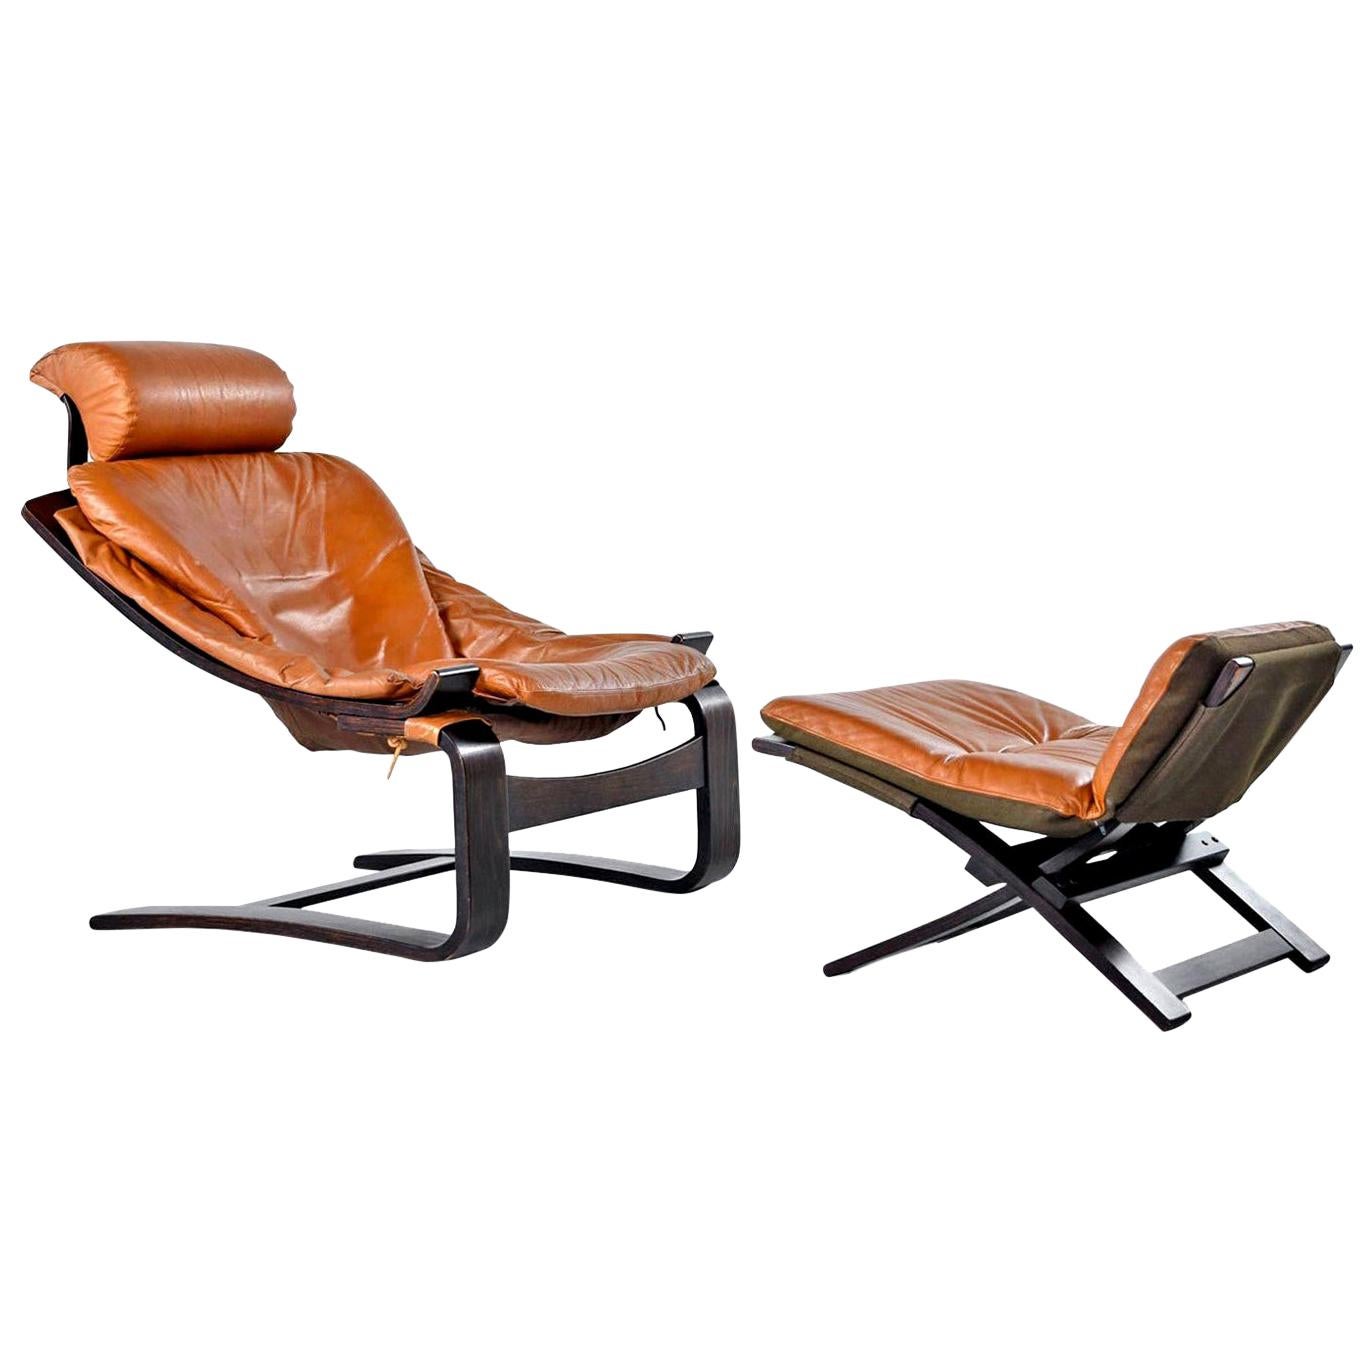 Ake Fribytter for Nelo Cognac Leather Rosewood Kroken Lounge Chair and Ottoman